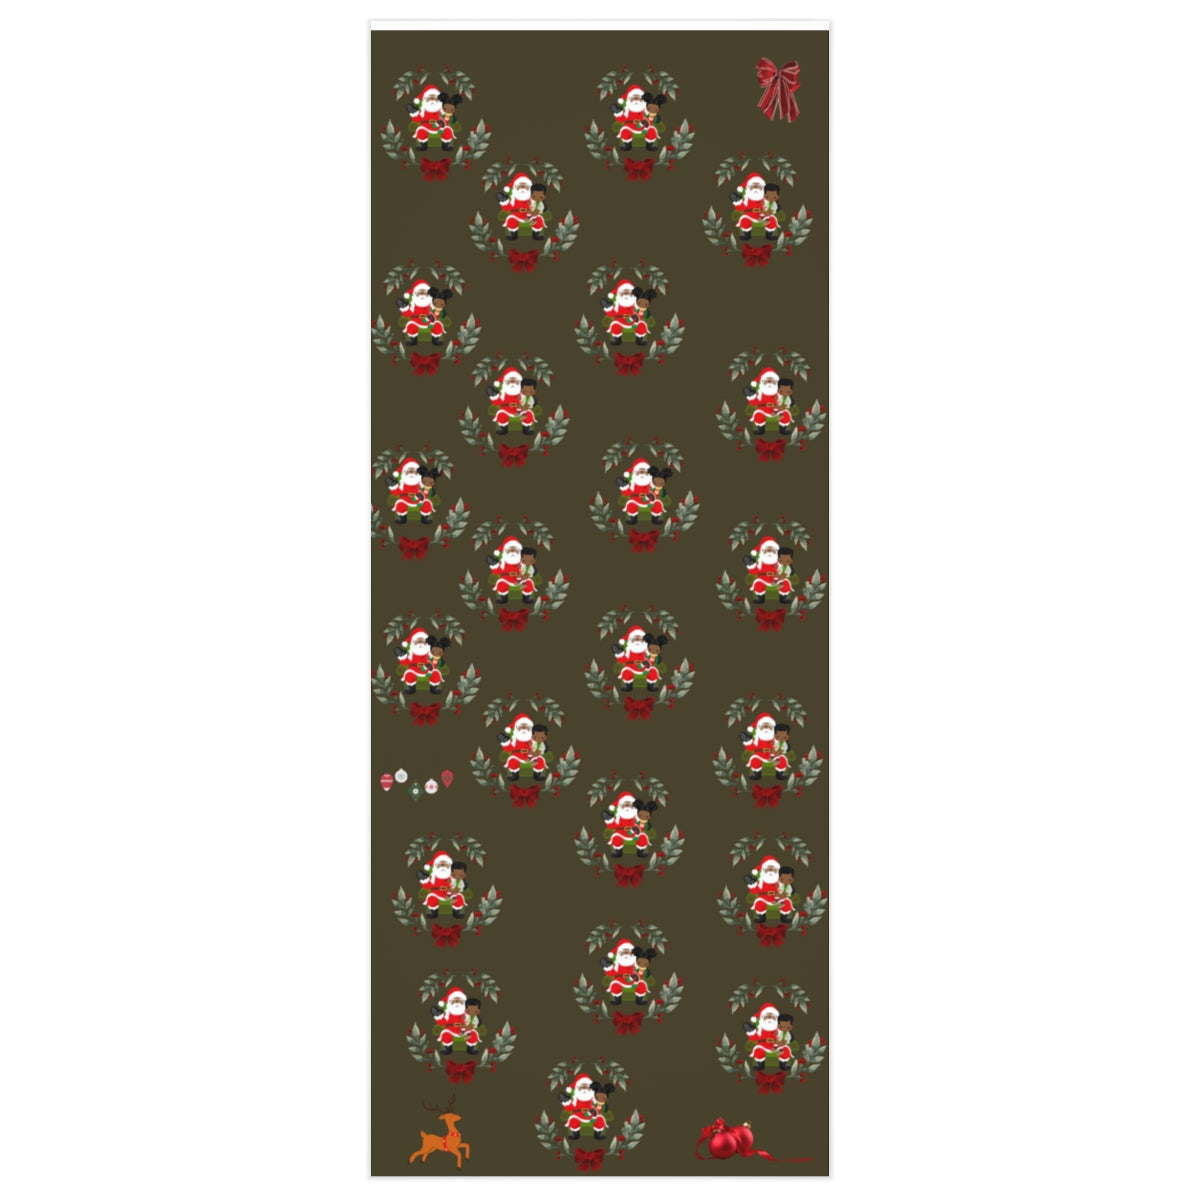 Sitting on Santa's Lap (brown background) - Wrapping Paper